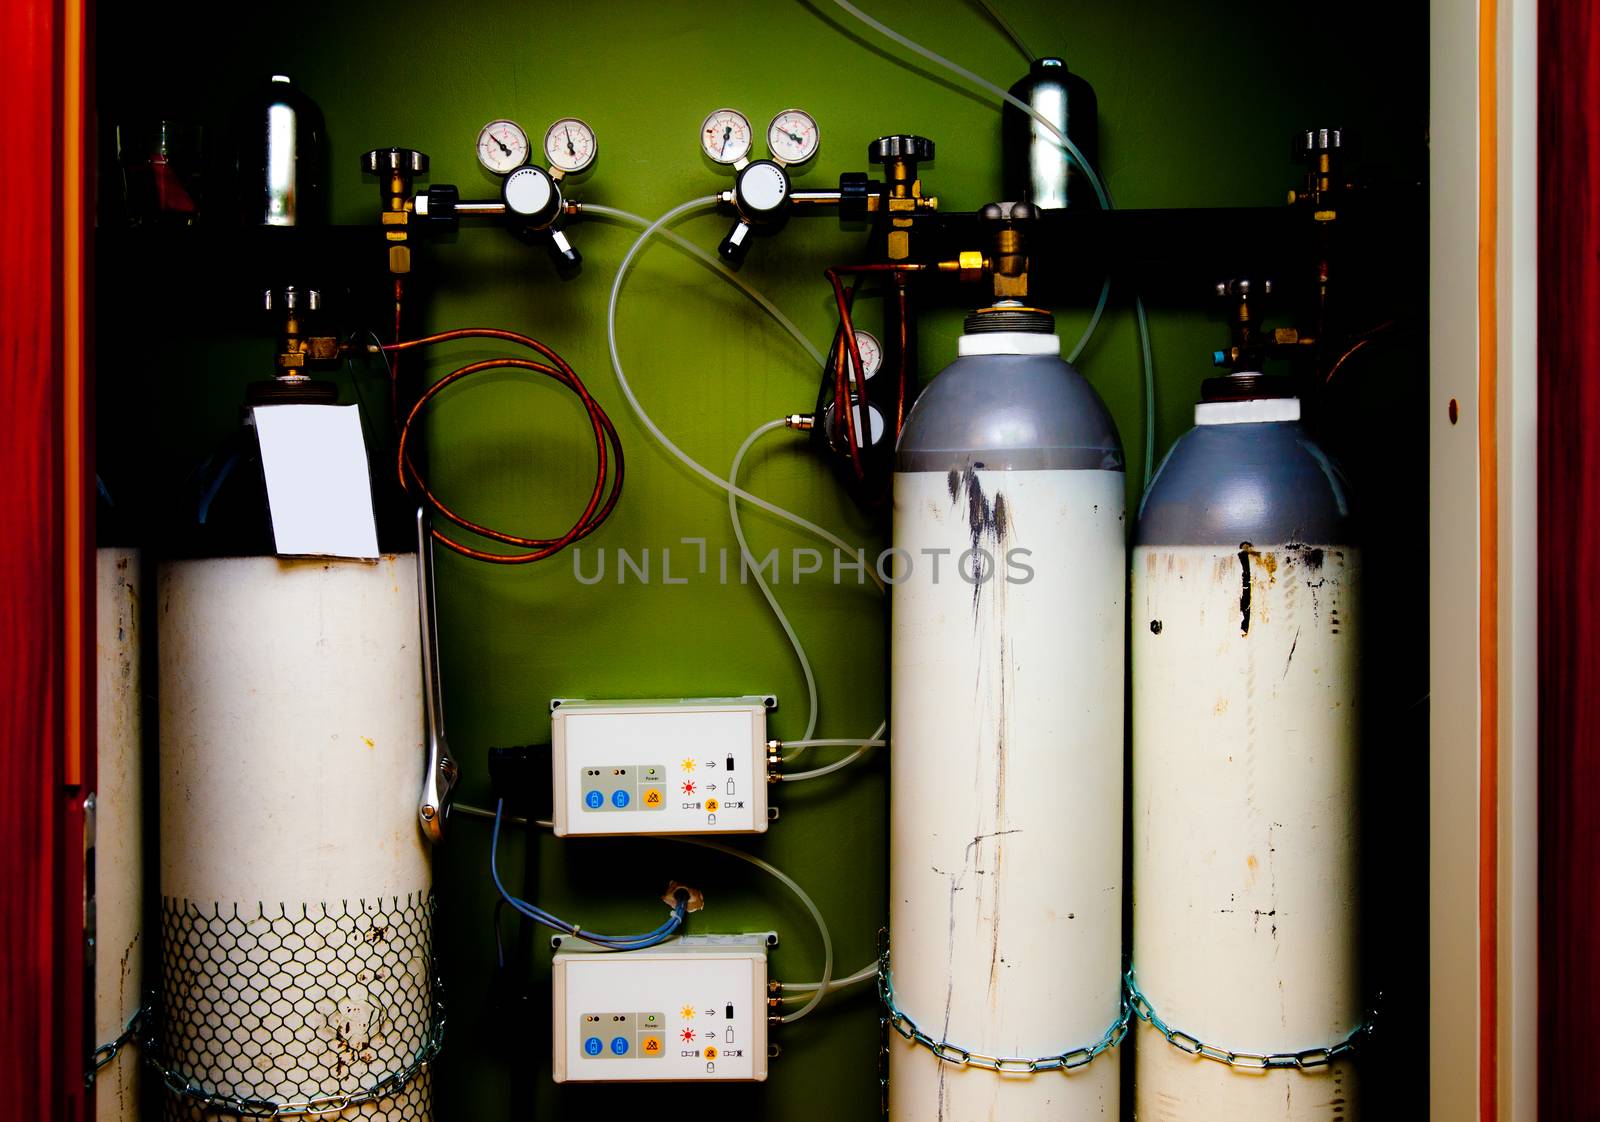 Bottles and controls of a high pressure gas station for medical gases.